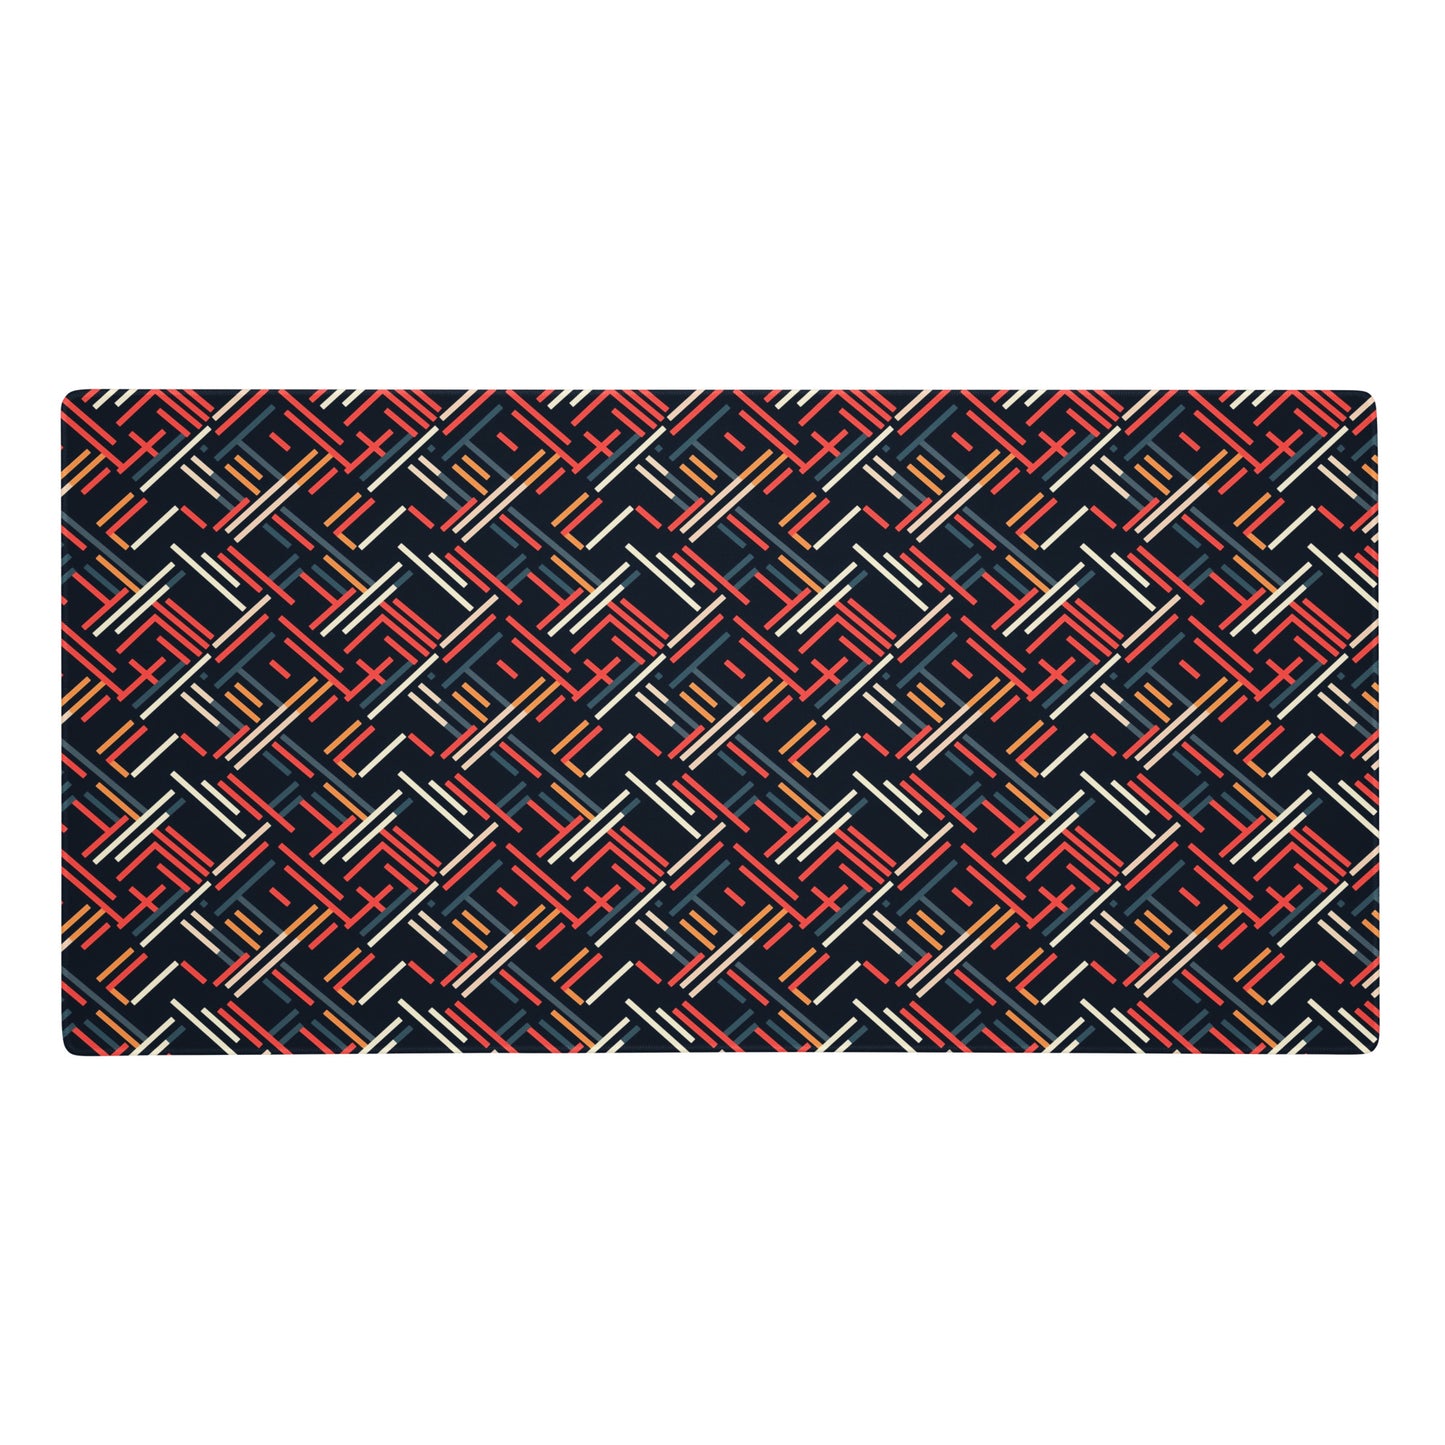 A 36" x 18" gaming desk pad with red, blue, white, and orange lines on a black background.